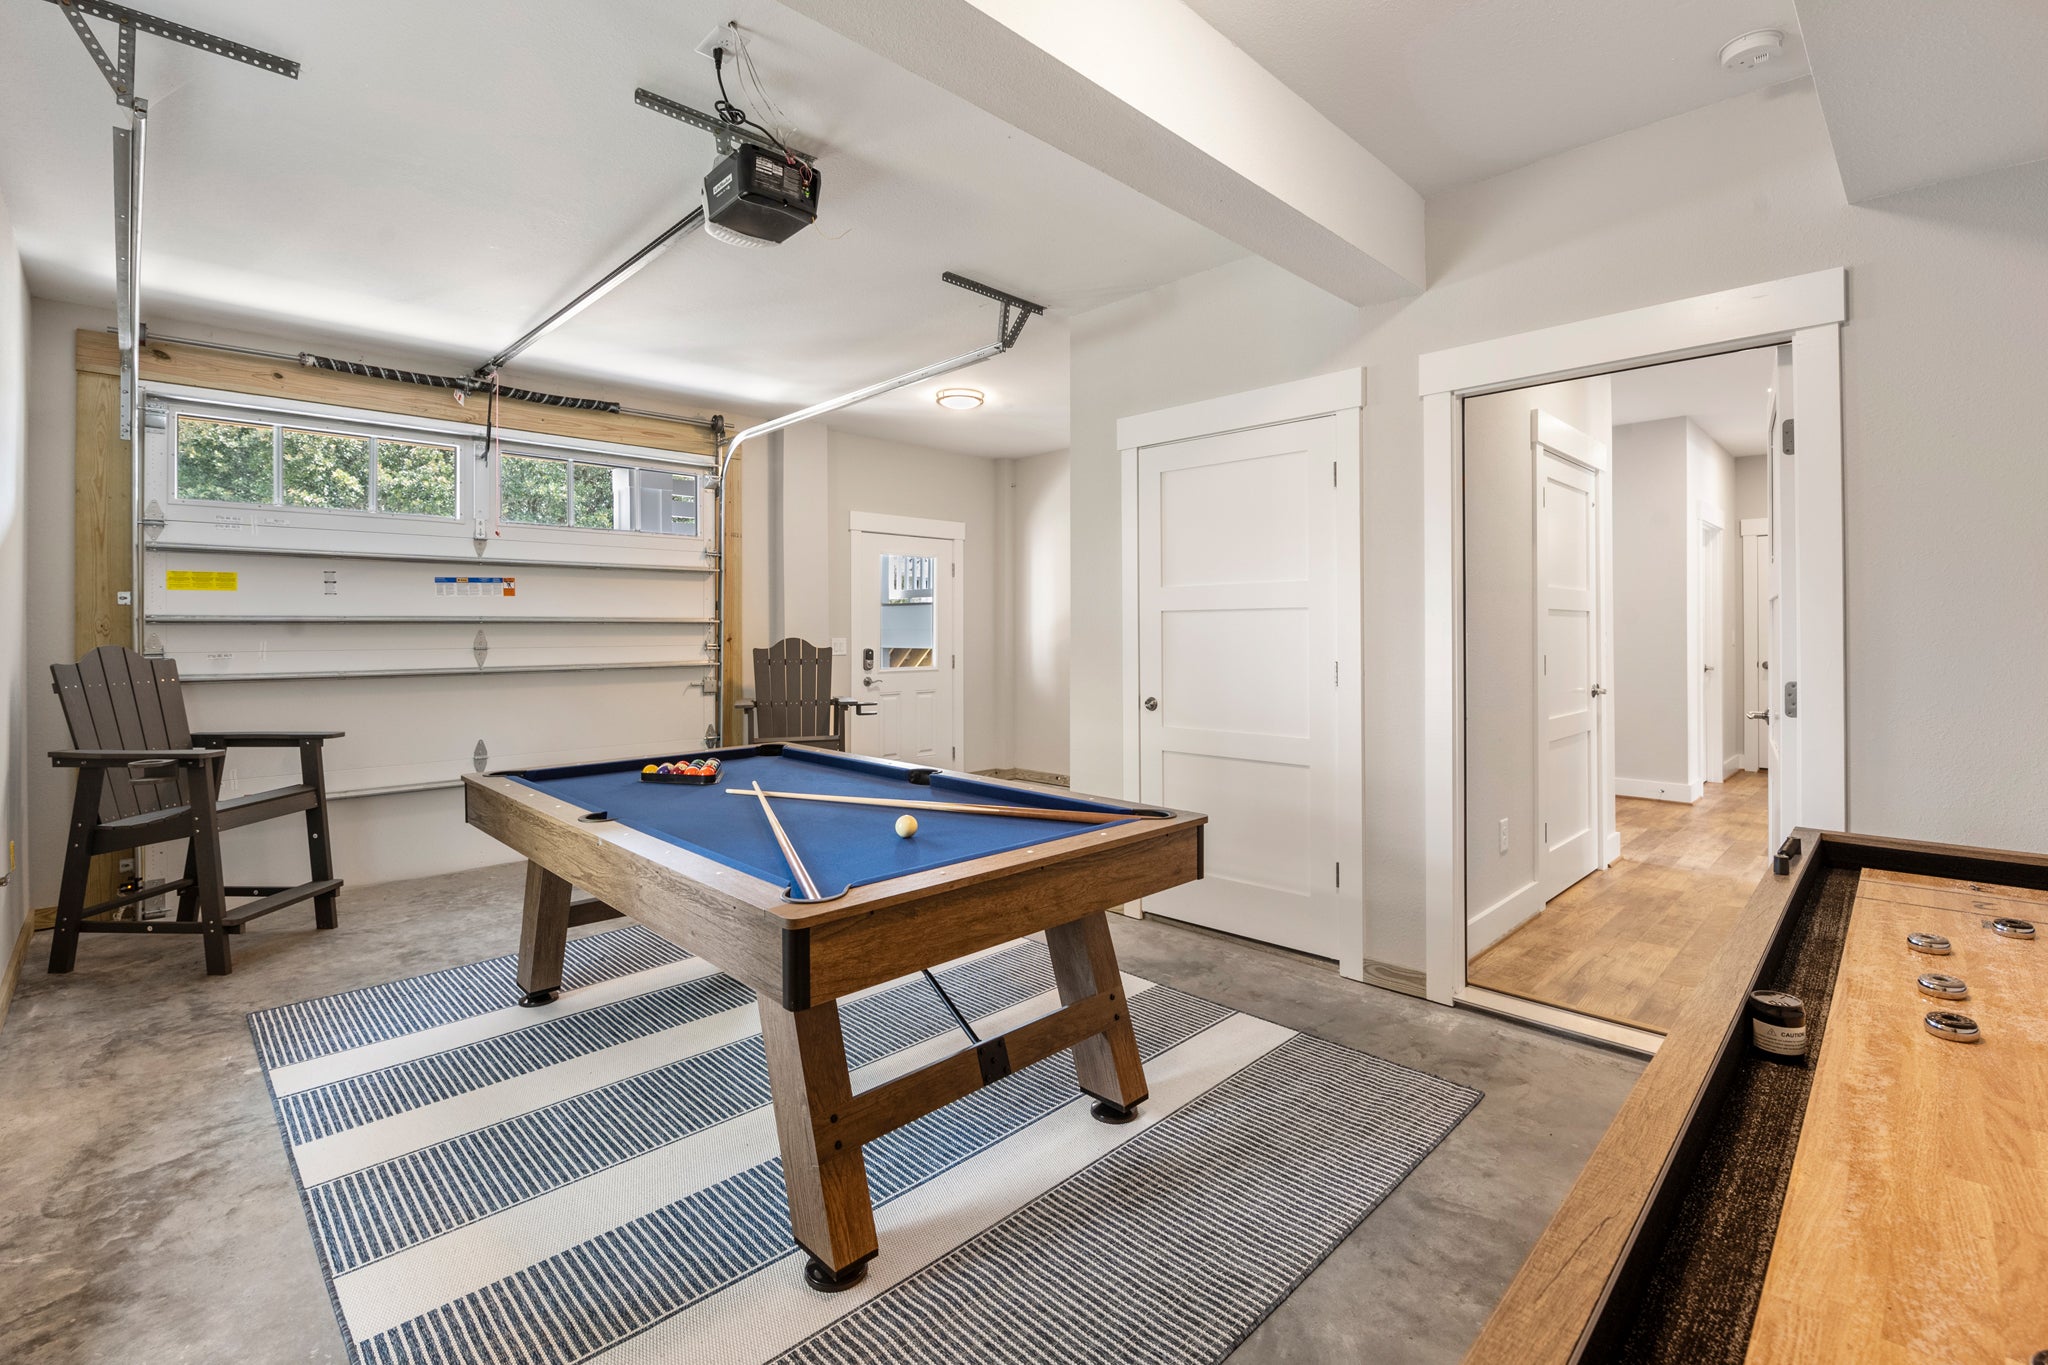 CC287: Go With The Flow | Garage w/ Pool Table & Shuffleboard Table